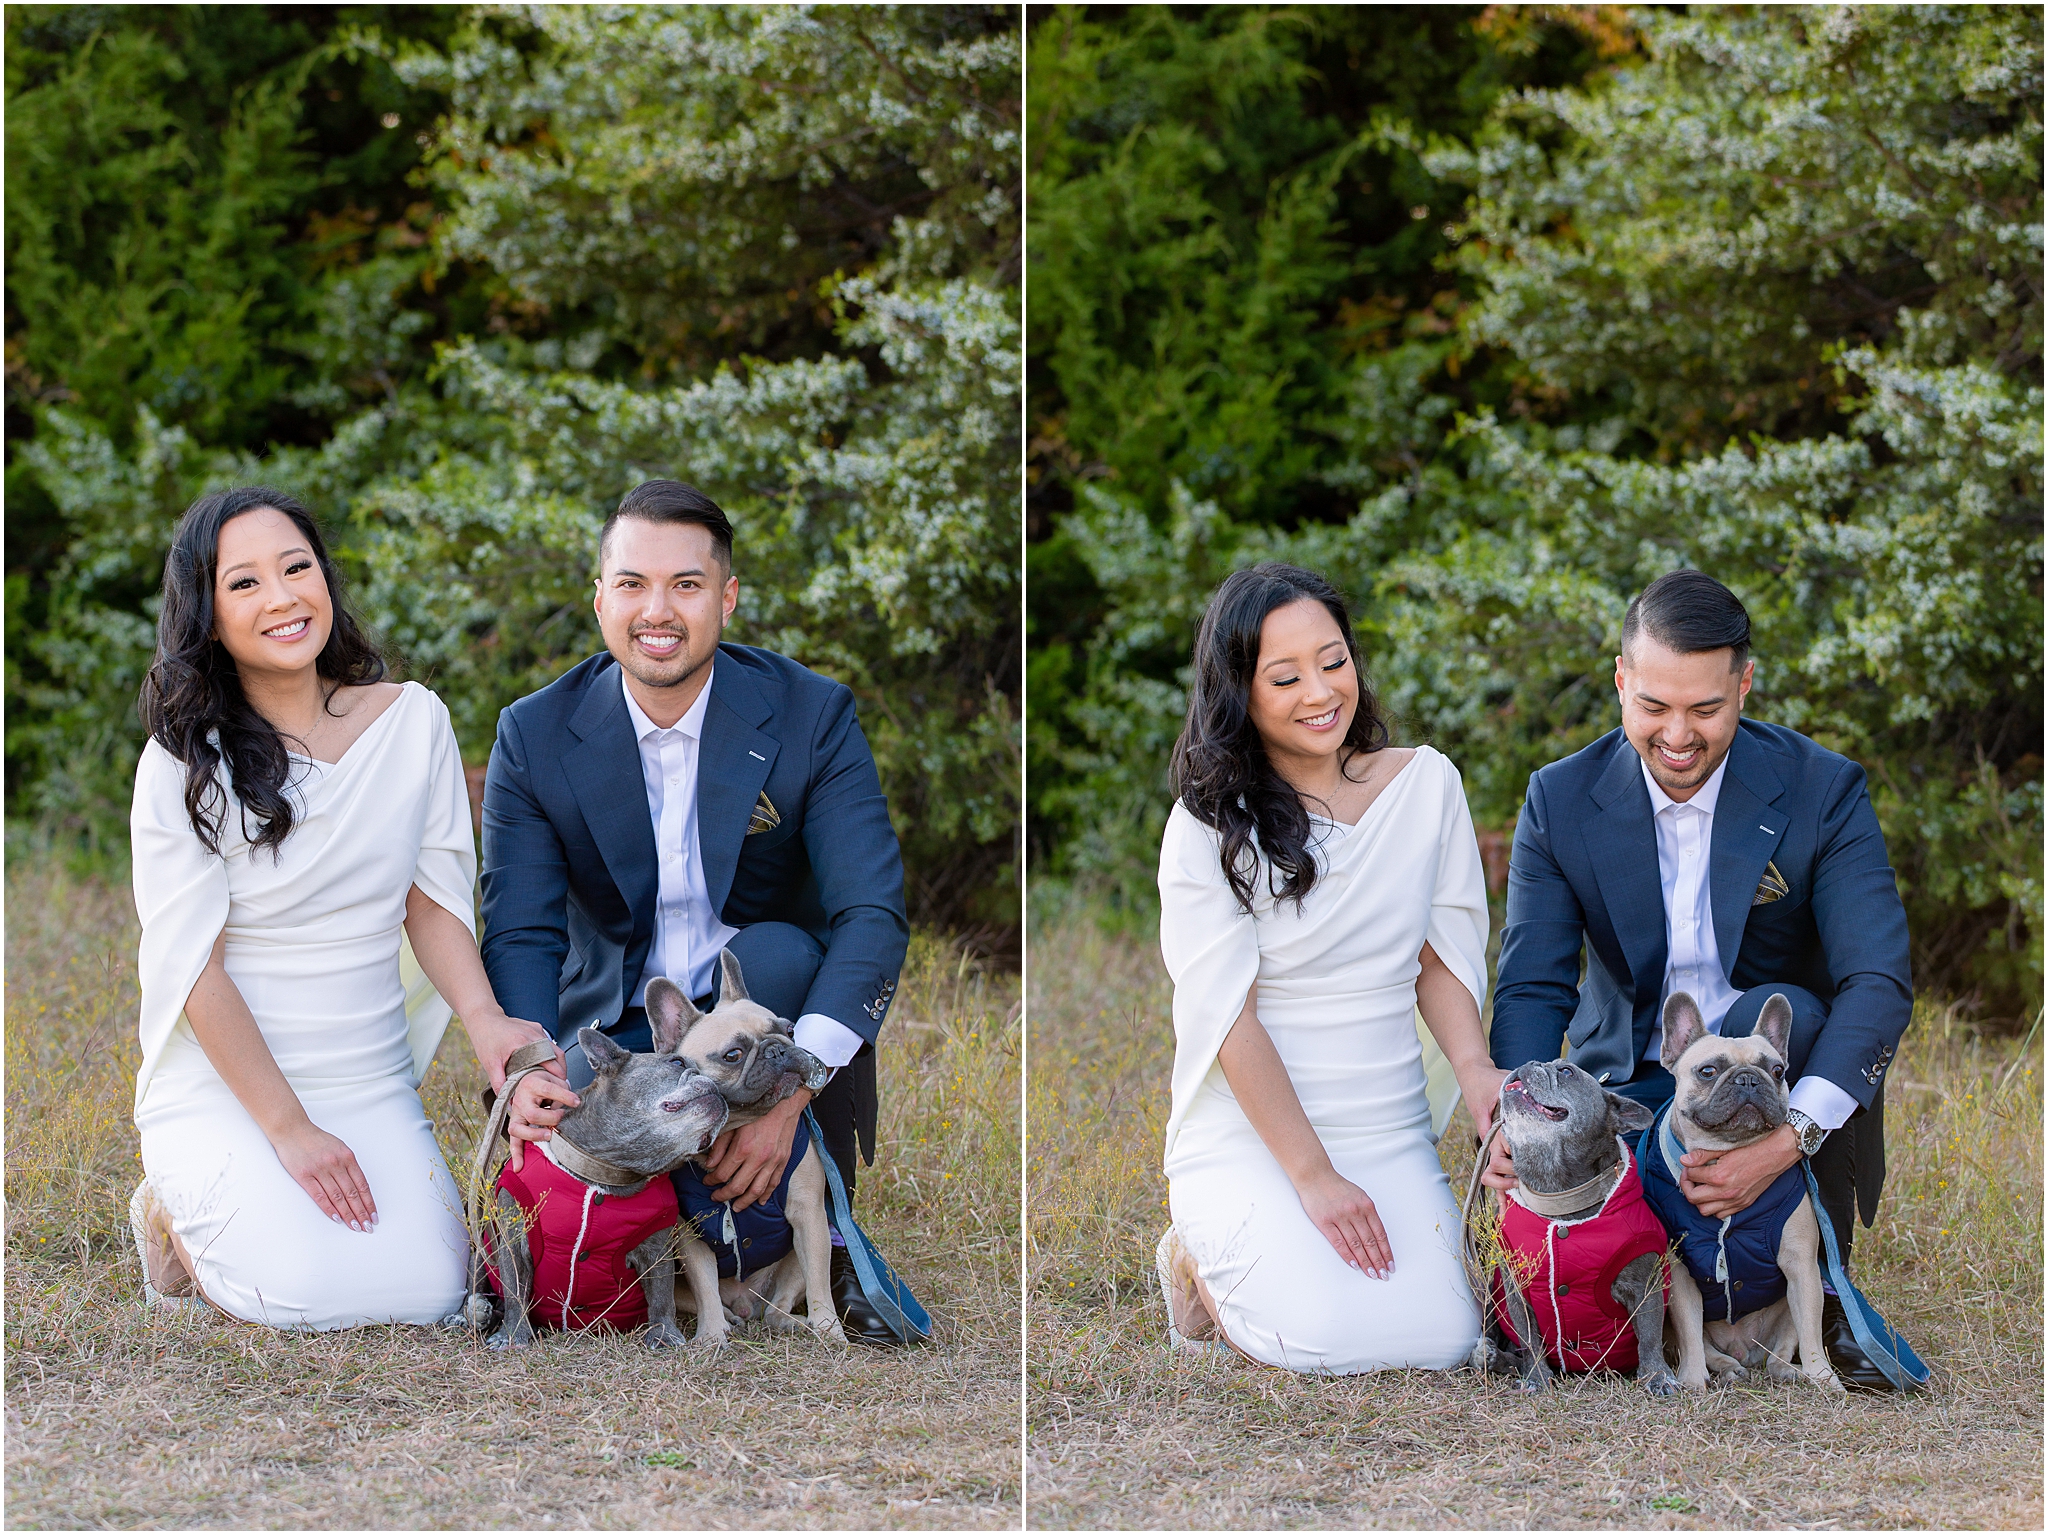 Dallas Engagement Session in a nature reserve with a dog